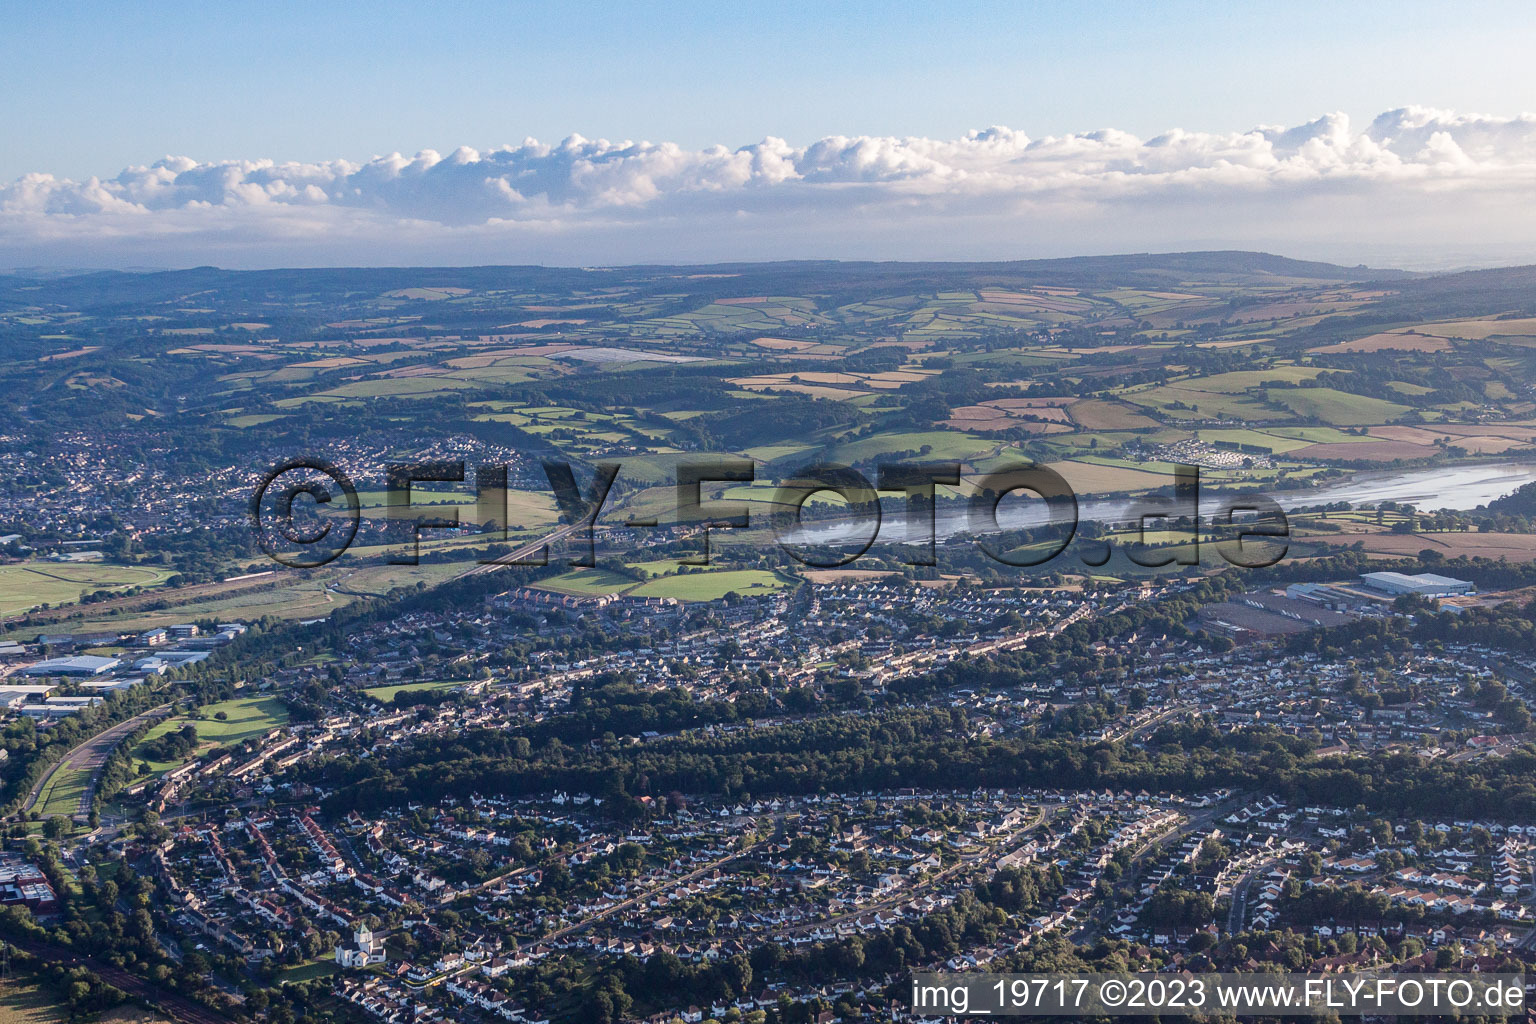 Bird's eye view of Kingskerswell in the state England, Great Britain